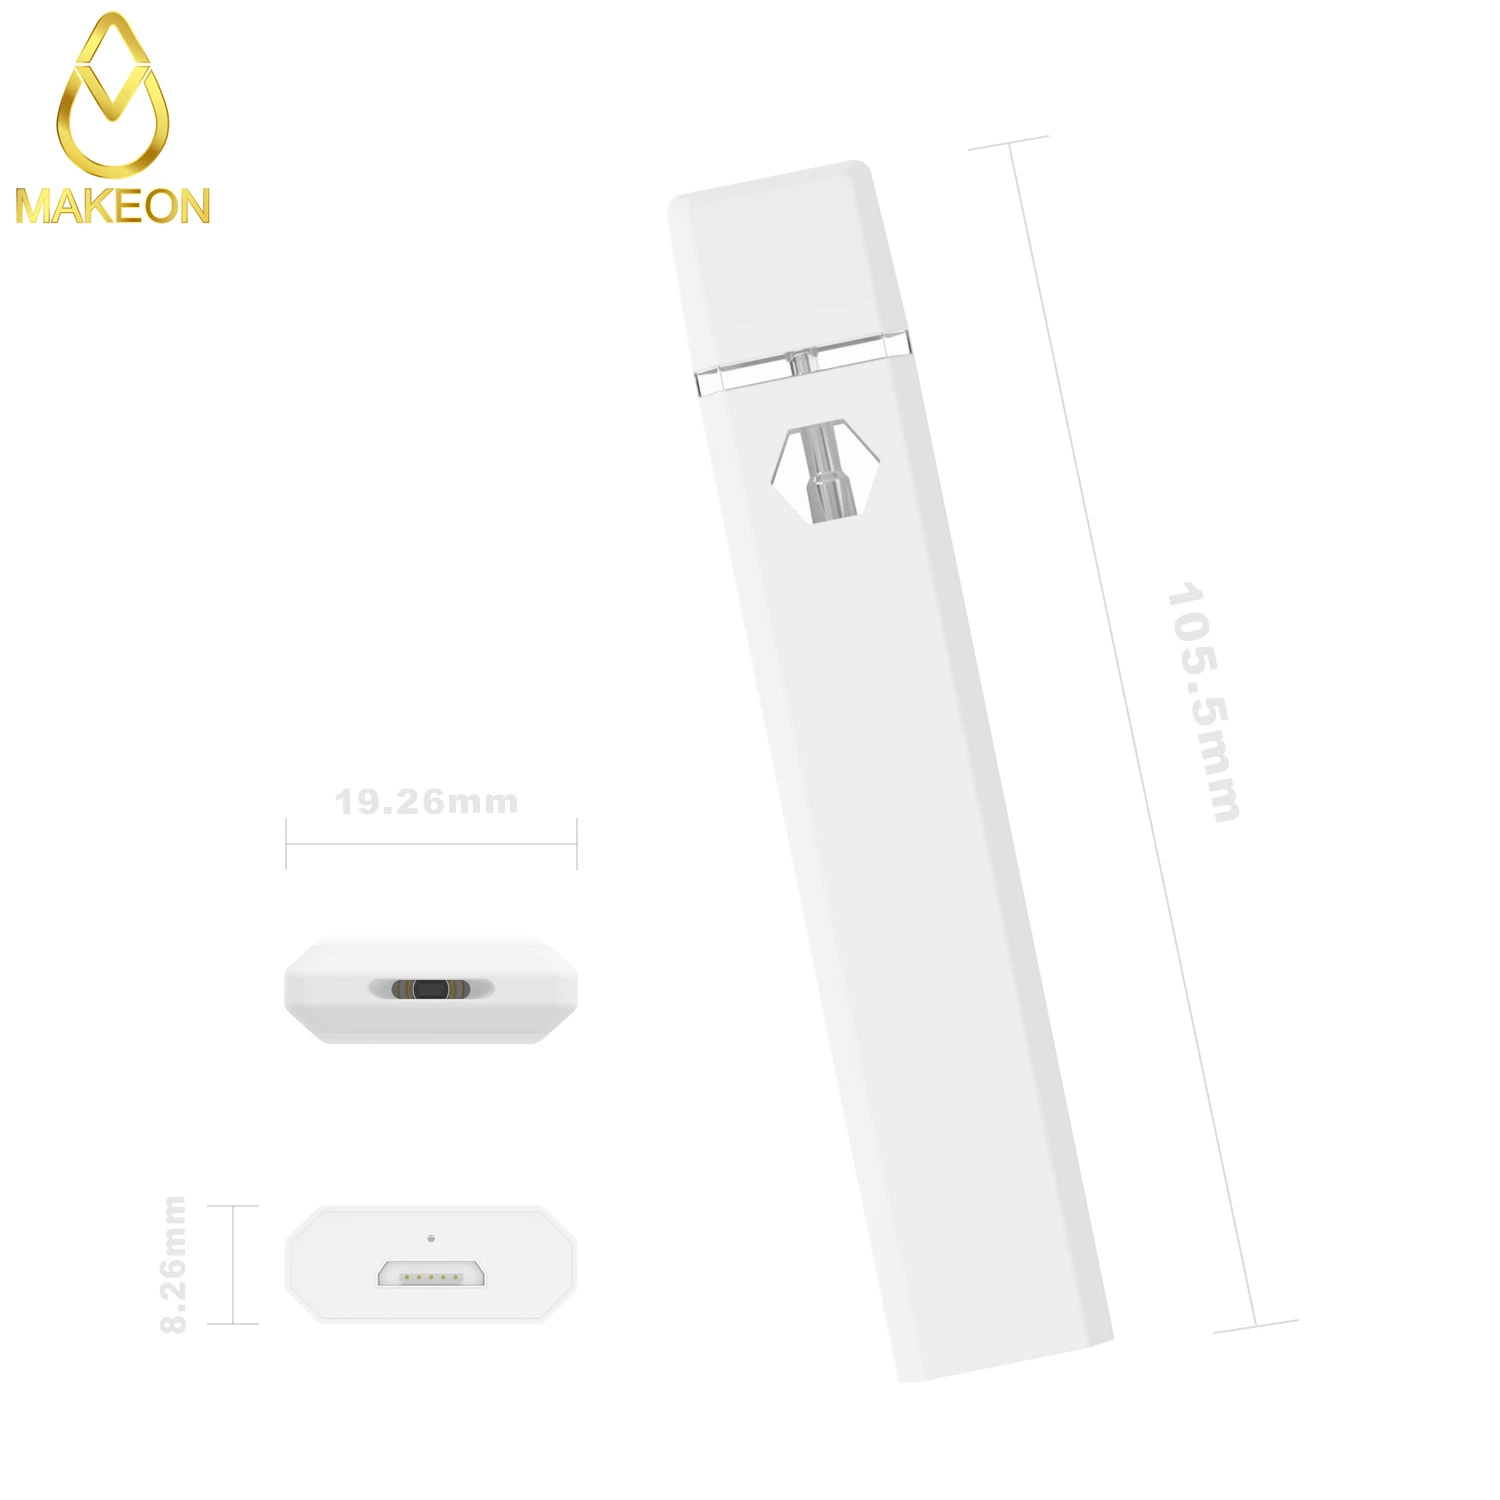 Makeon D10 Custom Vaporizer Vape Pen Hookah Thick Oil Live Resin Puffs Rechargeable Original High-Quality Electronic Cigarette with OEM Packaging